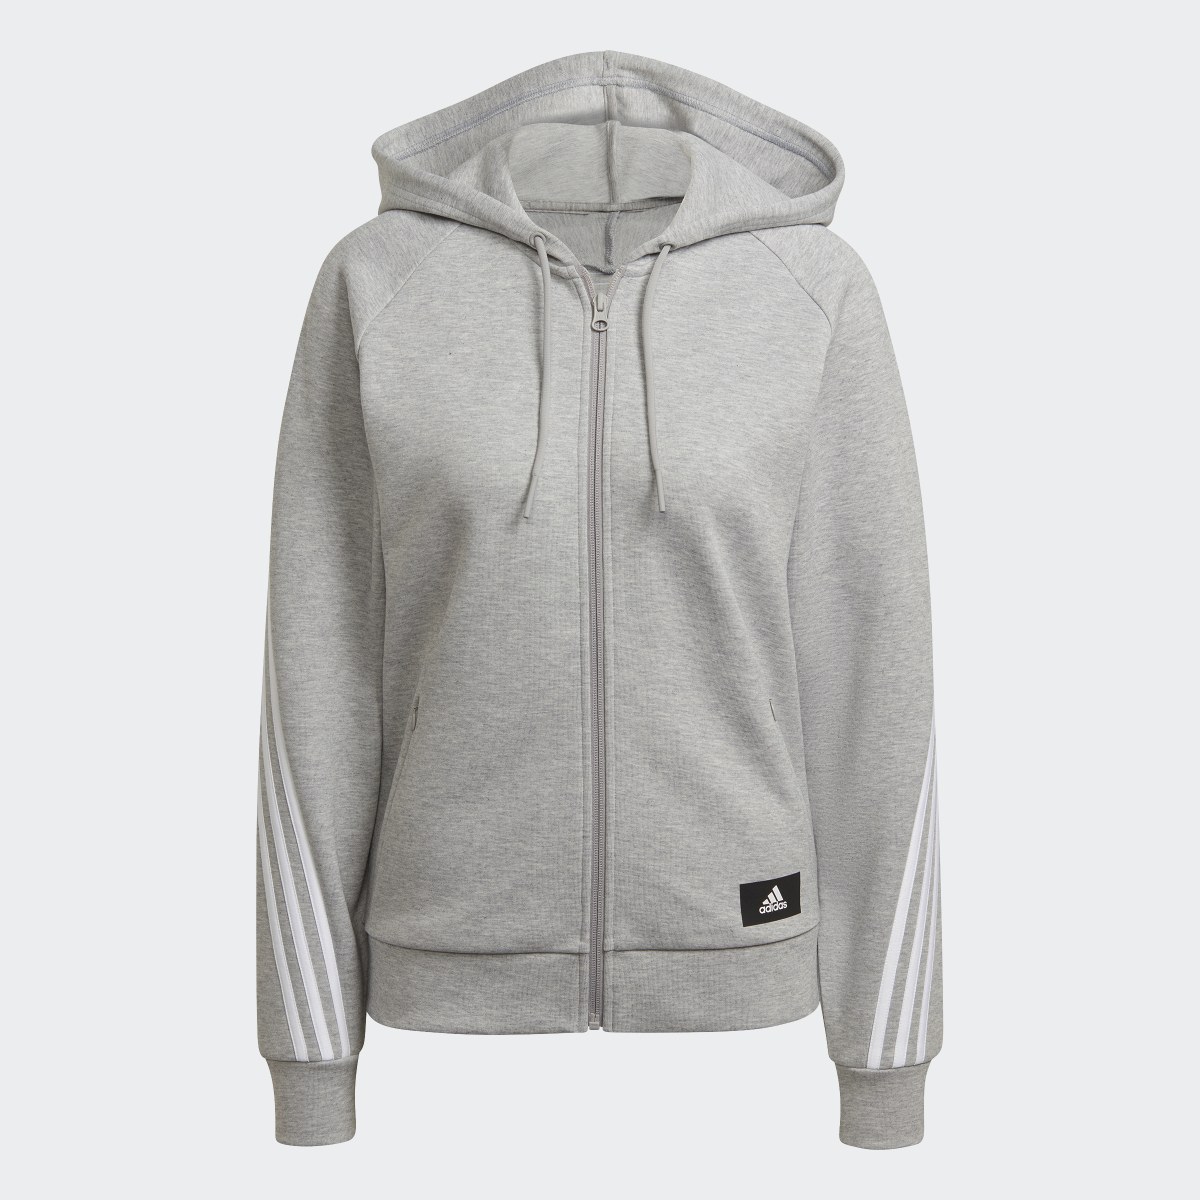 Adidas Sportswear Future Icons 3-Stripes Hooded Track Top. 5